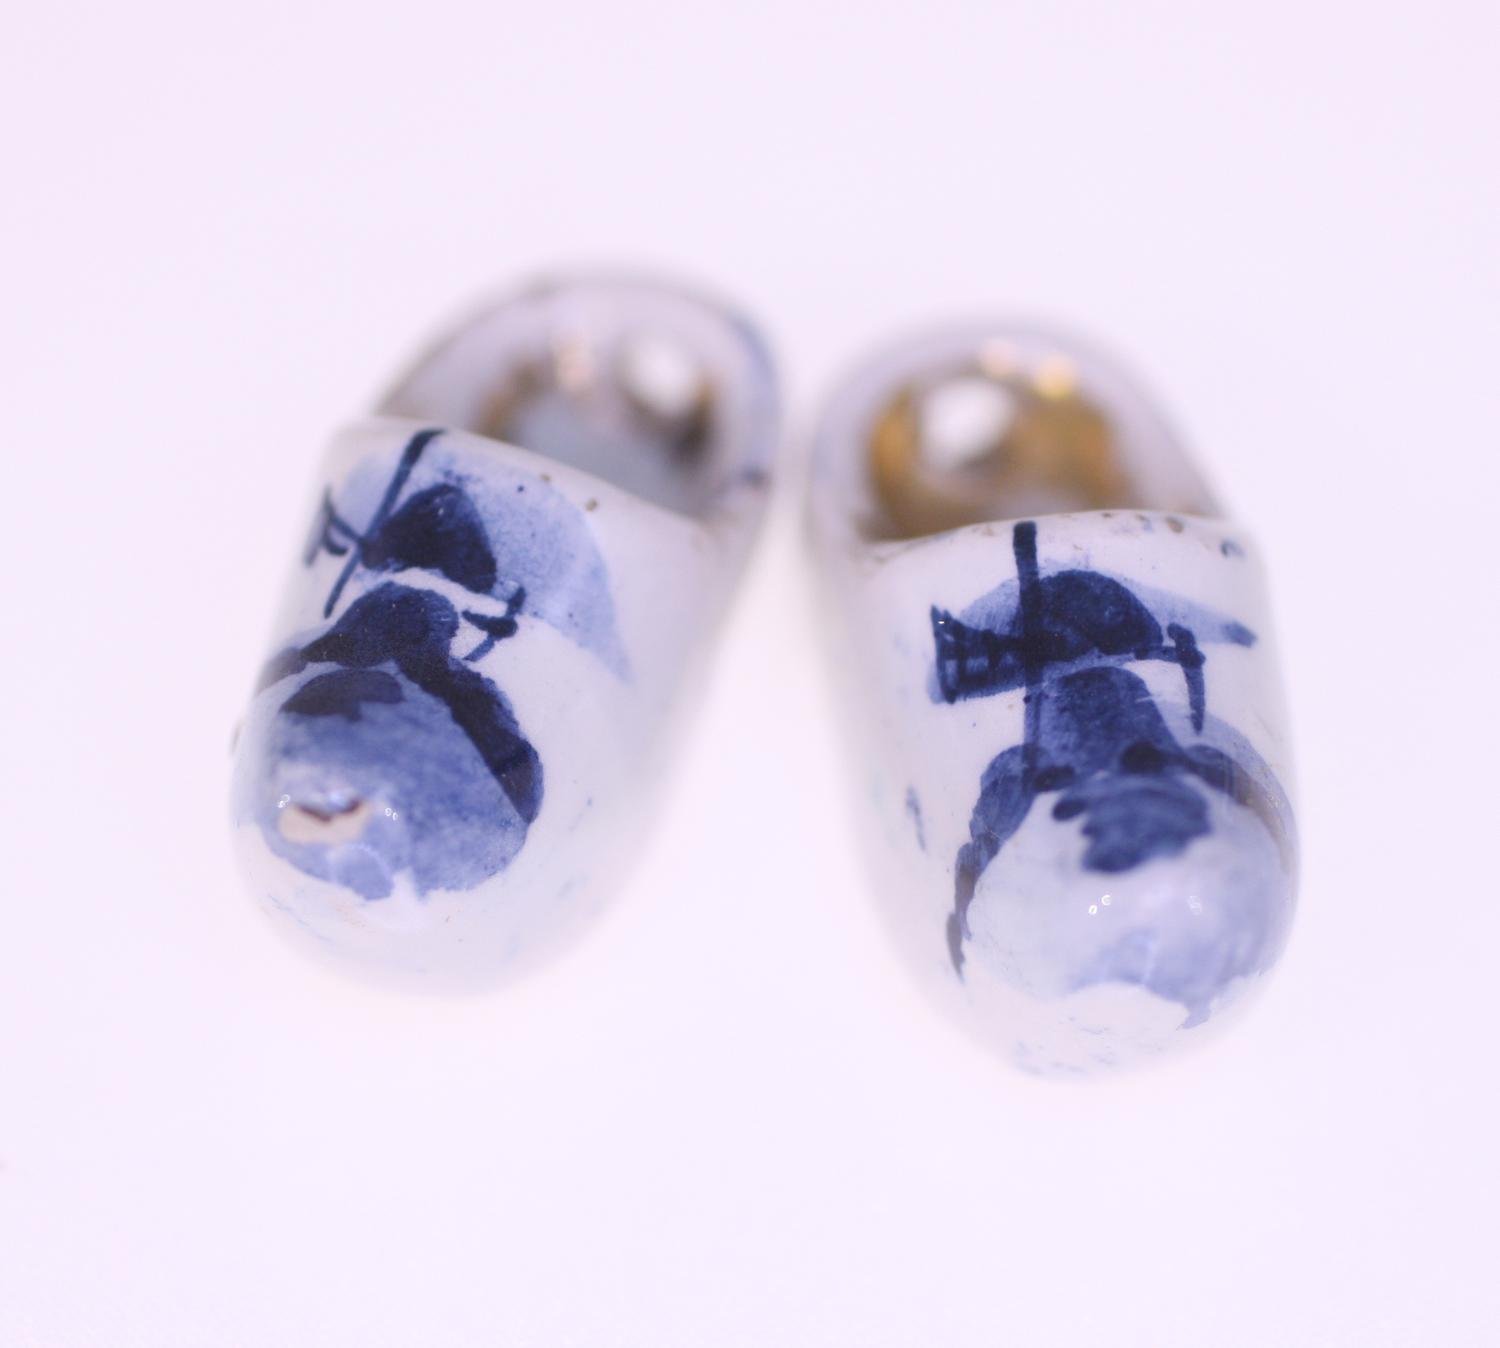 Vintage mini porcelain Delft clogs-circa 1970s-two pairs included-Weight 36g